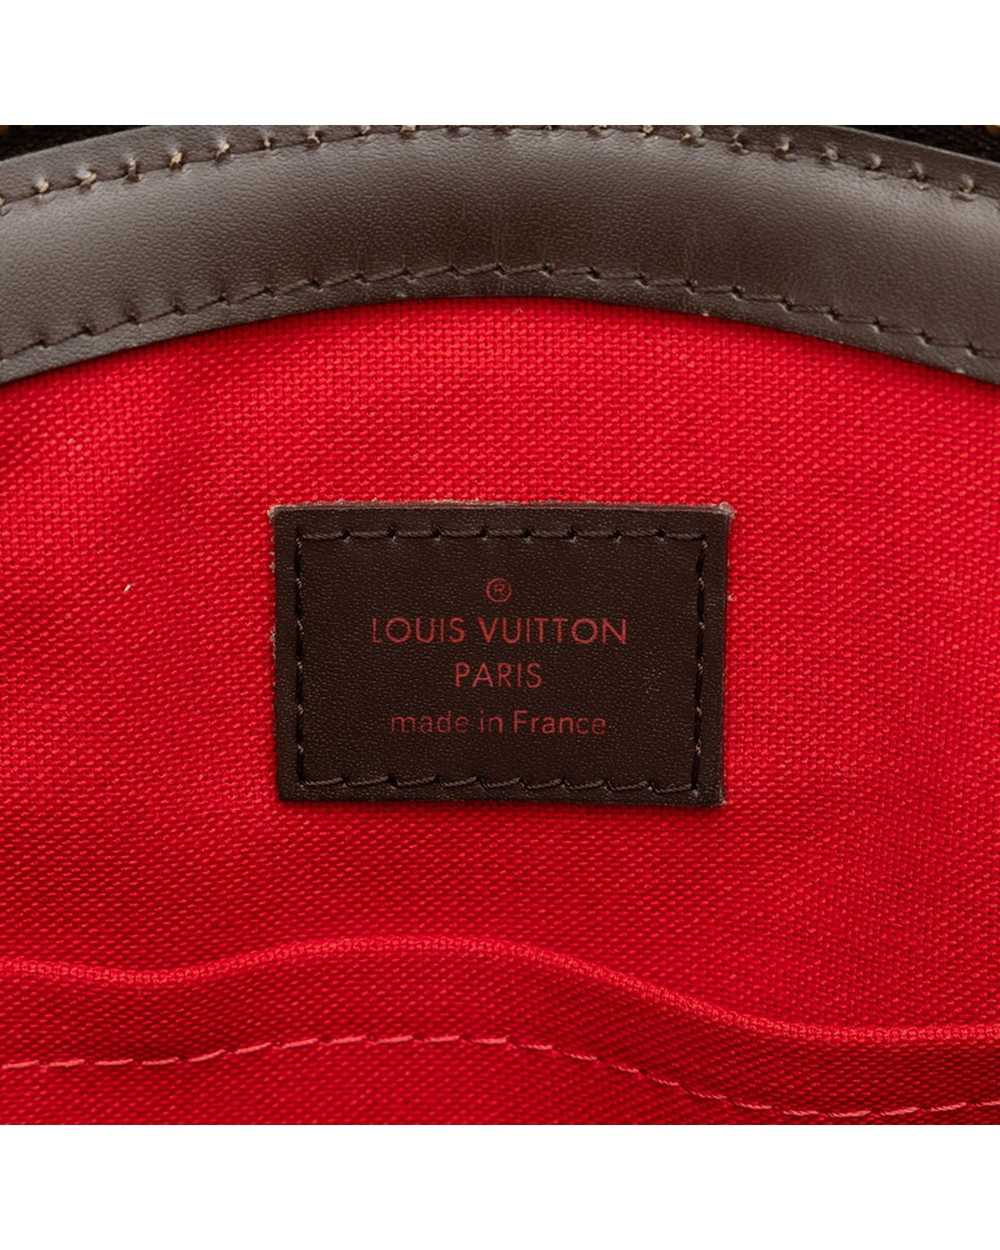 Louis Vuitton Brown Leather Verona PM Bag in Exce… - image 6